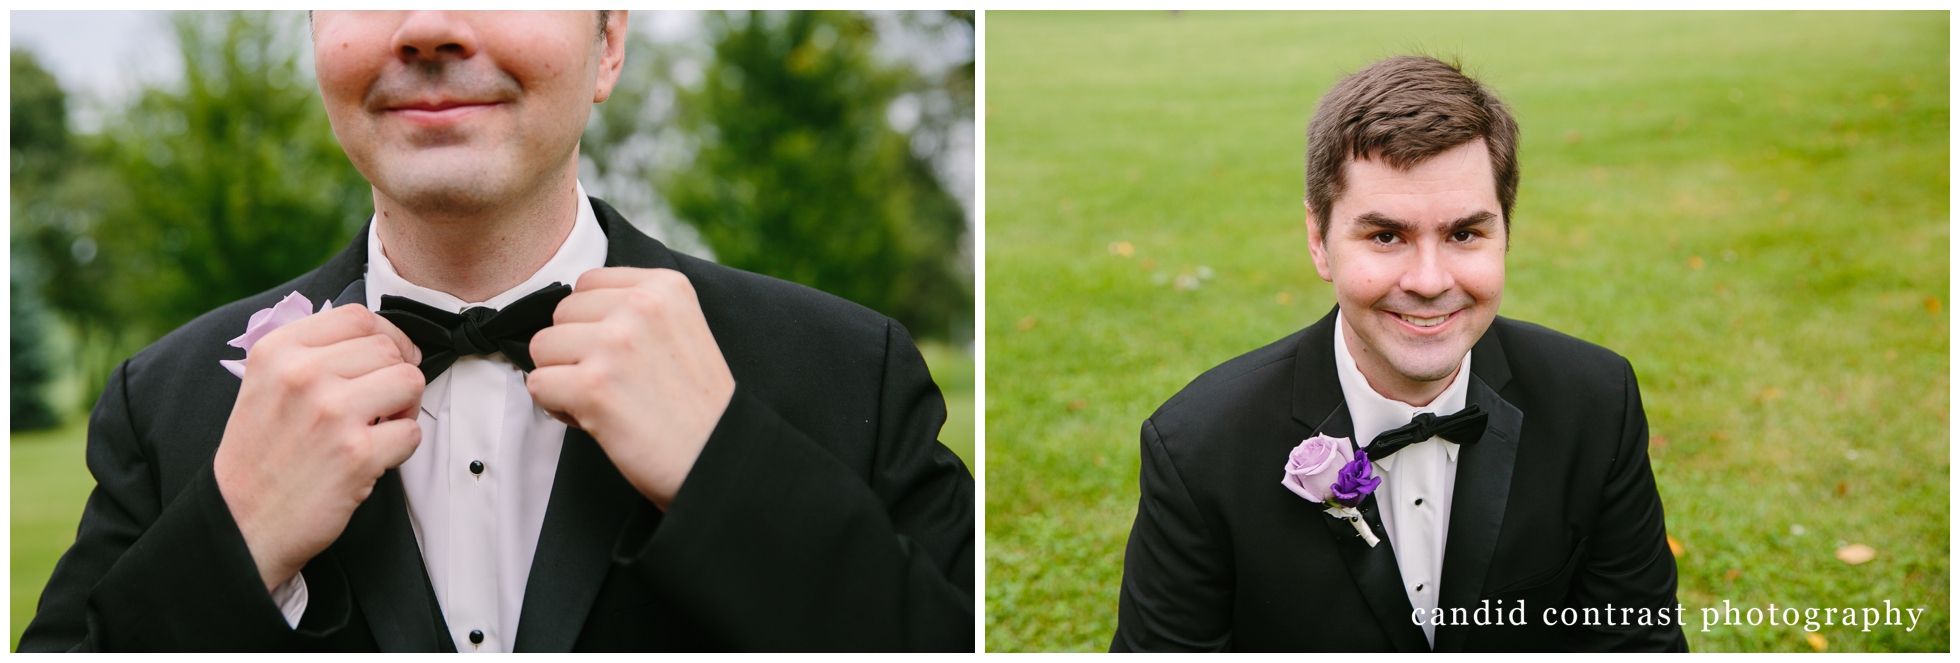 groom at classic Dubuque iowa wedding at the grand river center, candid contrast photography